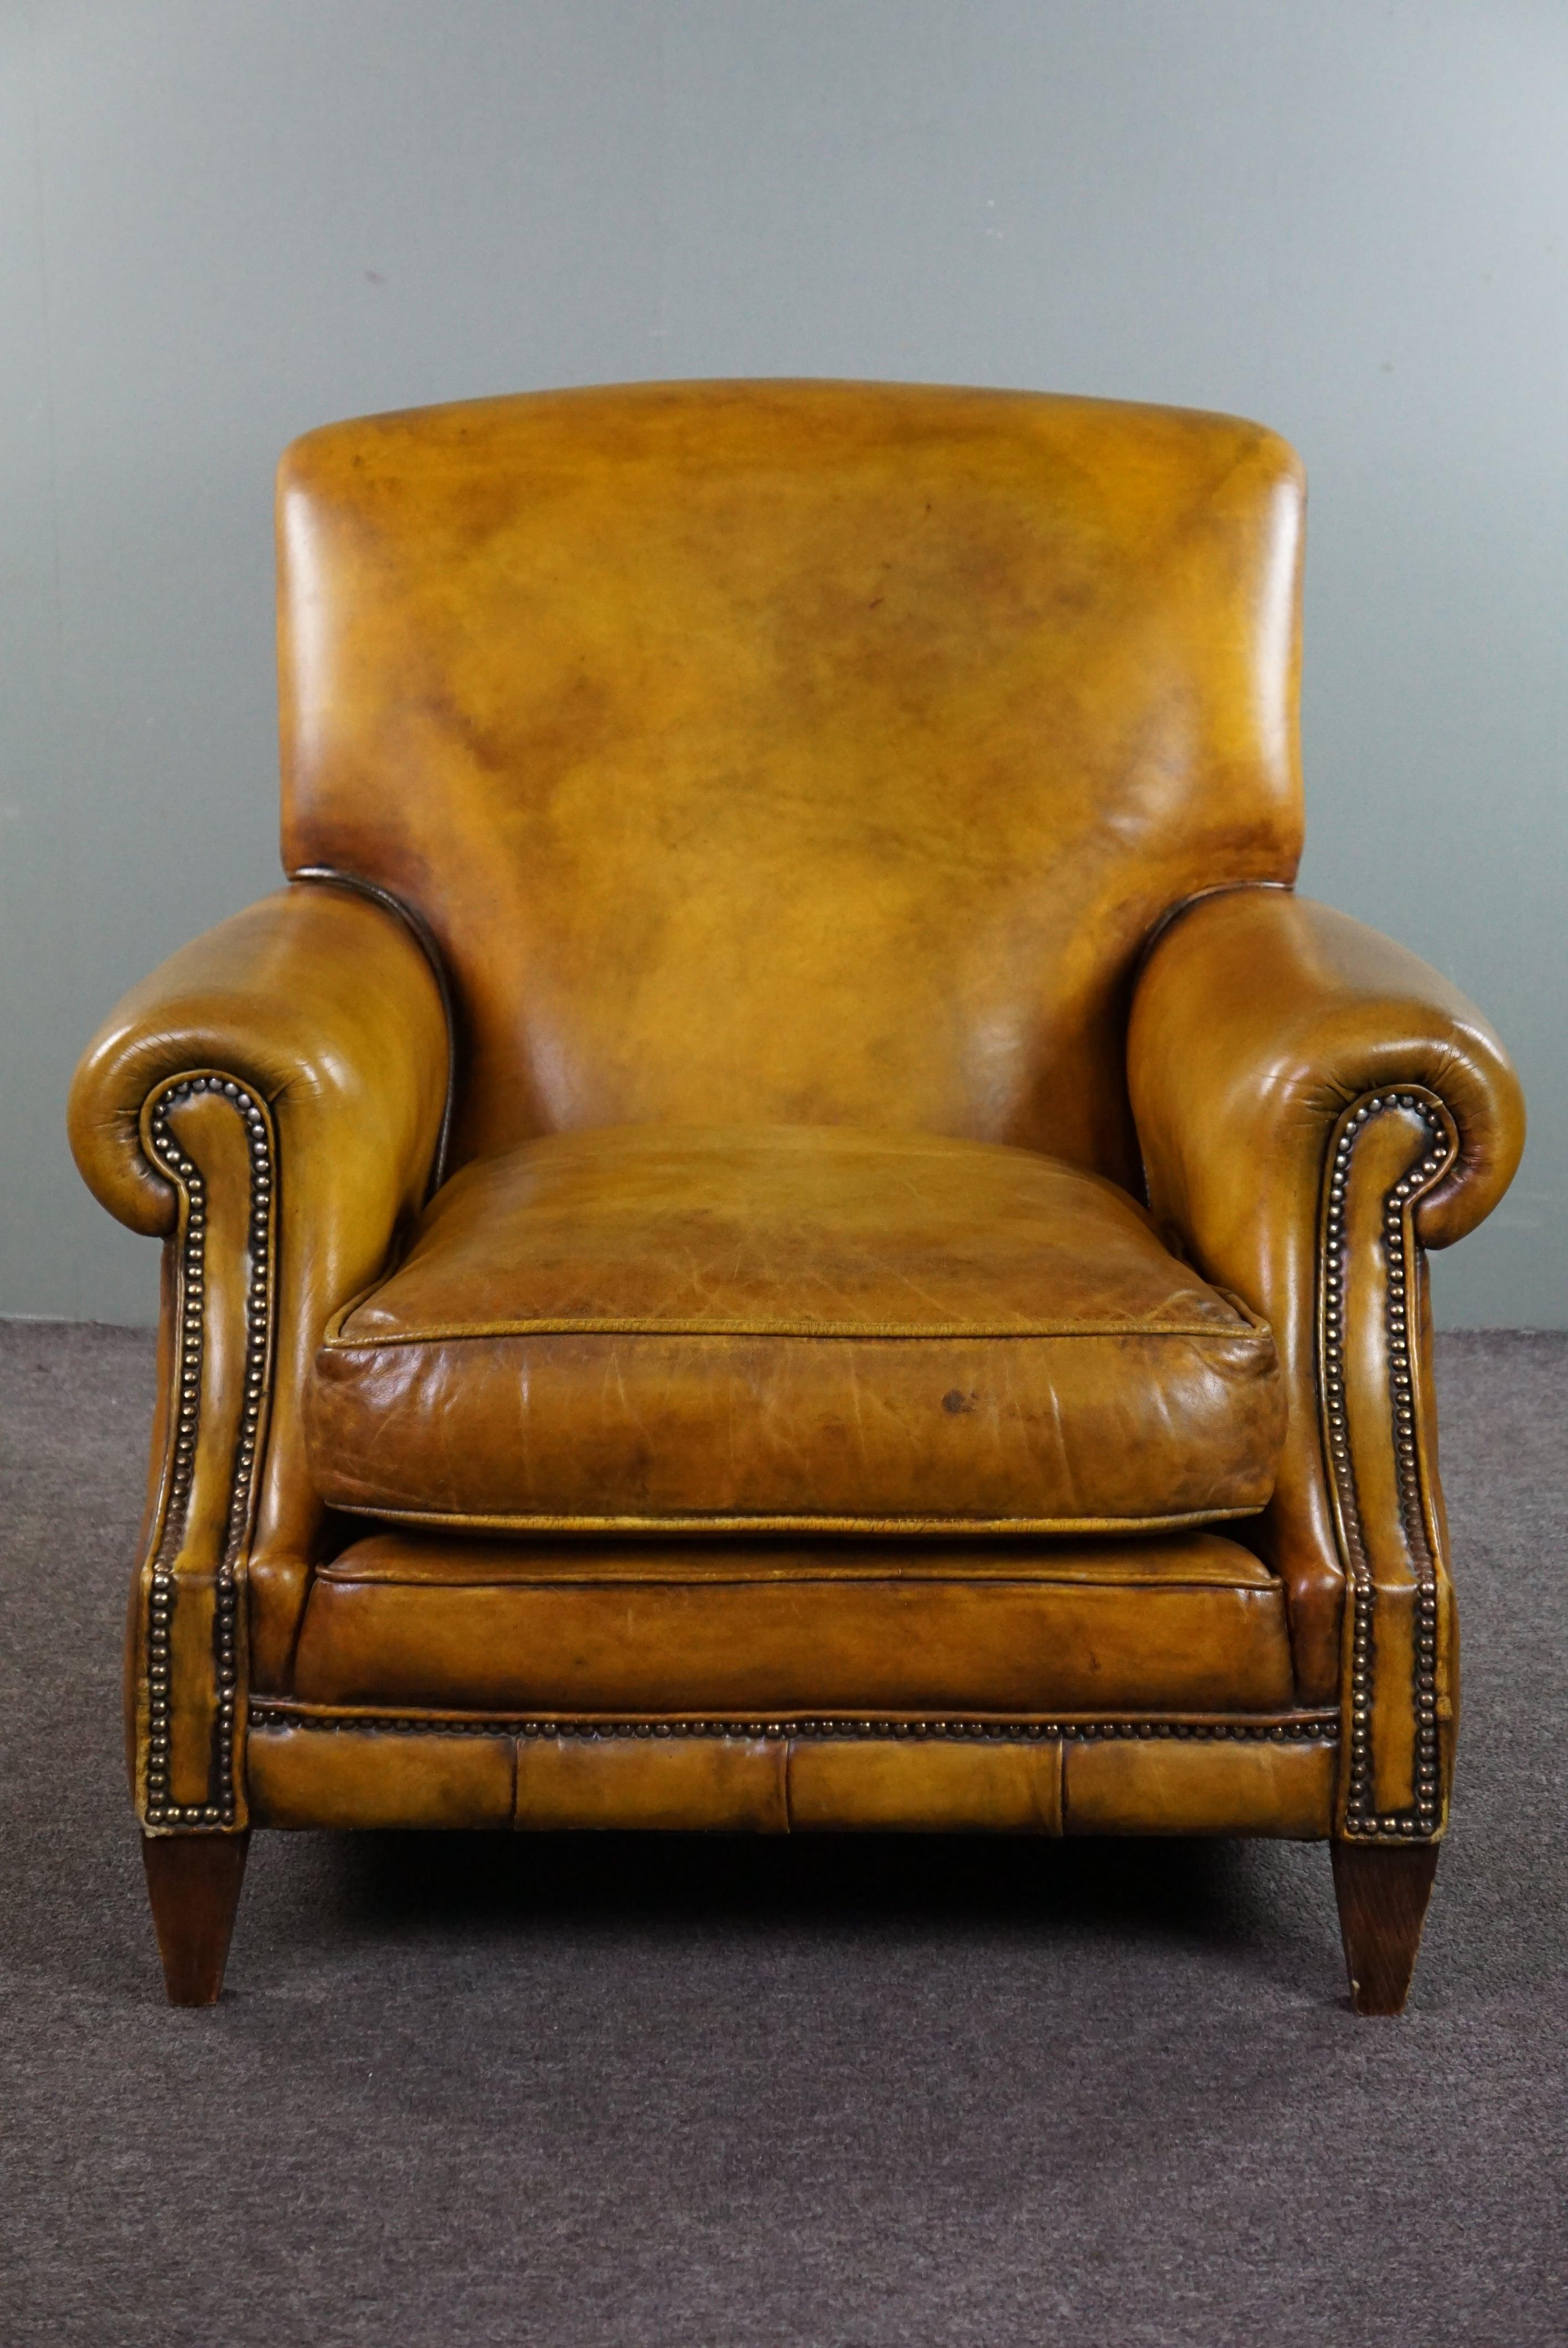 Offered is this fantastic large English cowhide armchair on wheels with an amazing appearance.

With its reclining backrest, this is a armchair in which you can sit for hours. Additionally, it exudes gracefulness in its appearance due to its proper